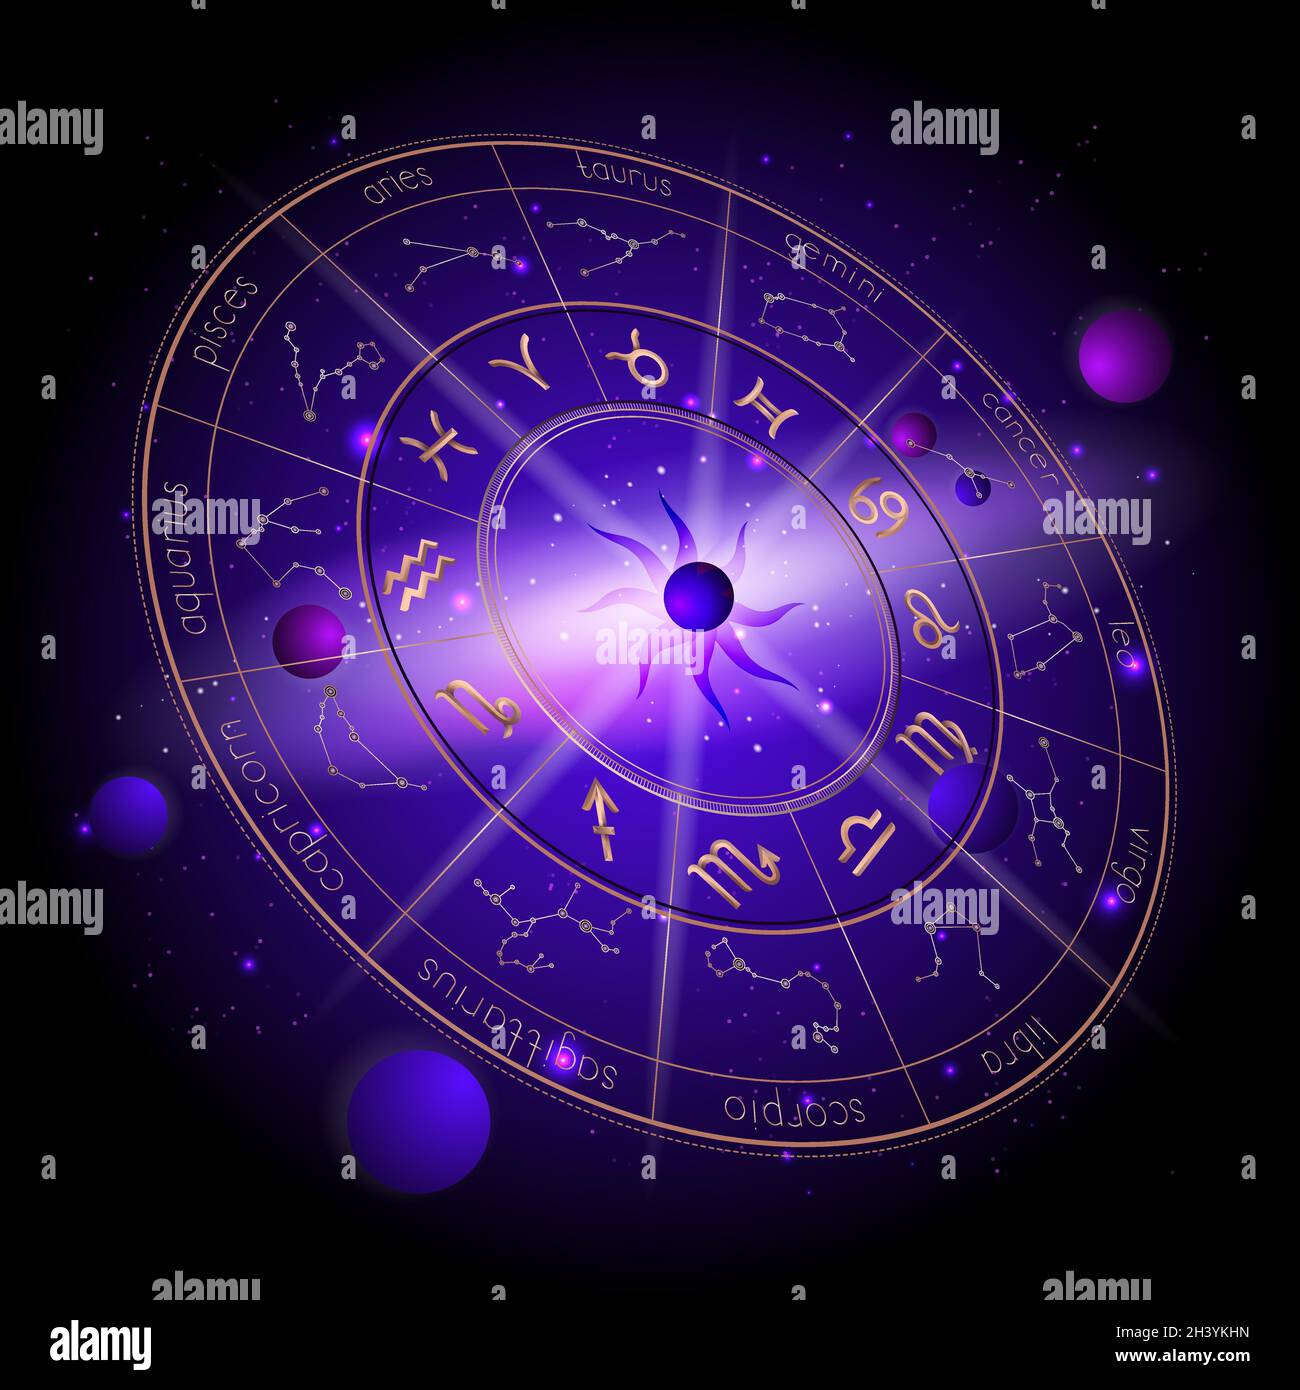 Vector illustration of Horoscope circle in perspective, Zodiac signs and astrology constellations against the space background with planets, stars and Stock Vector